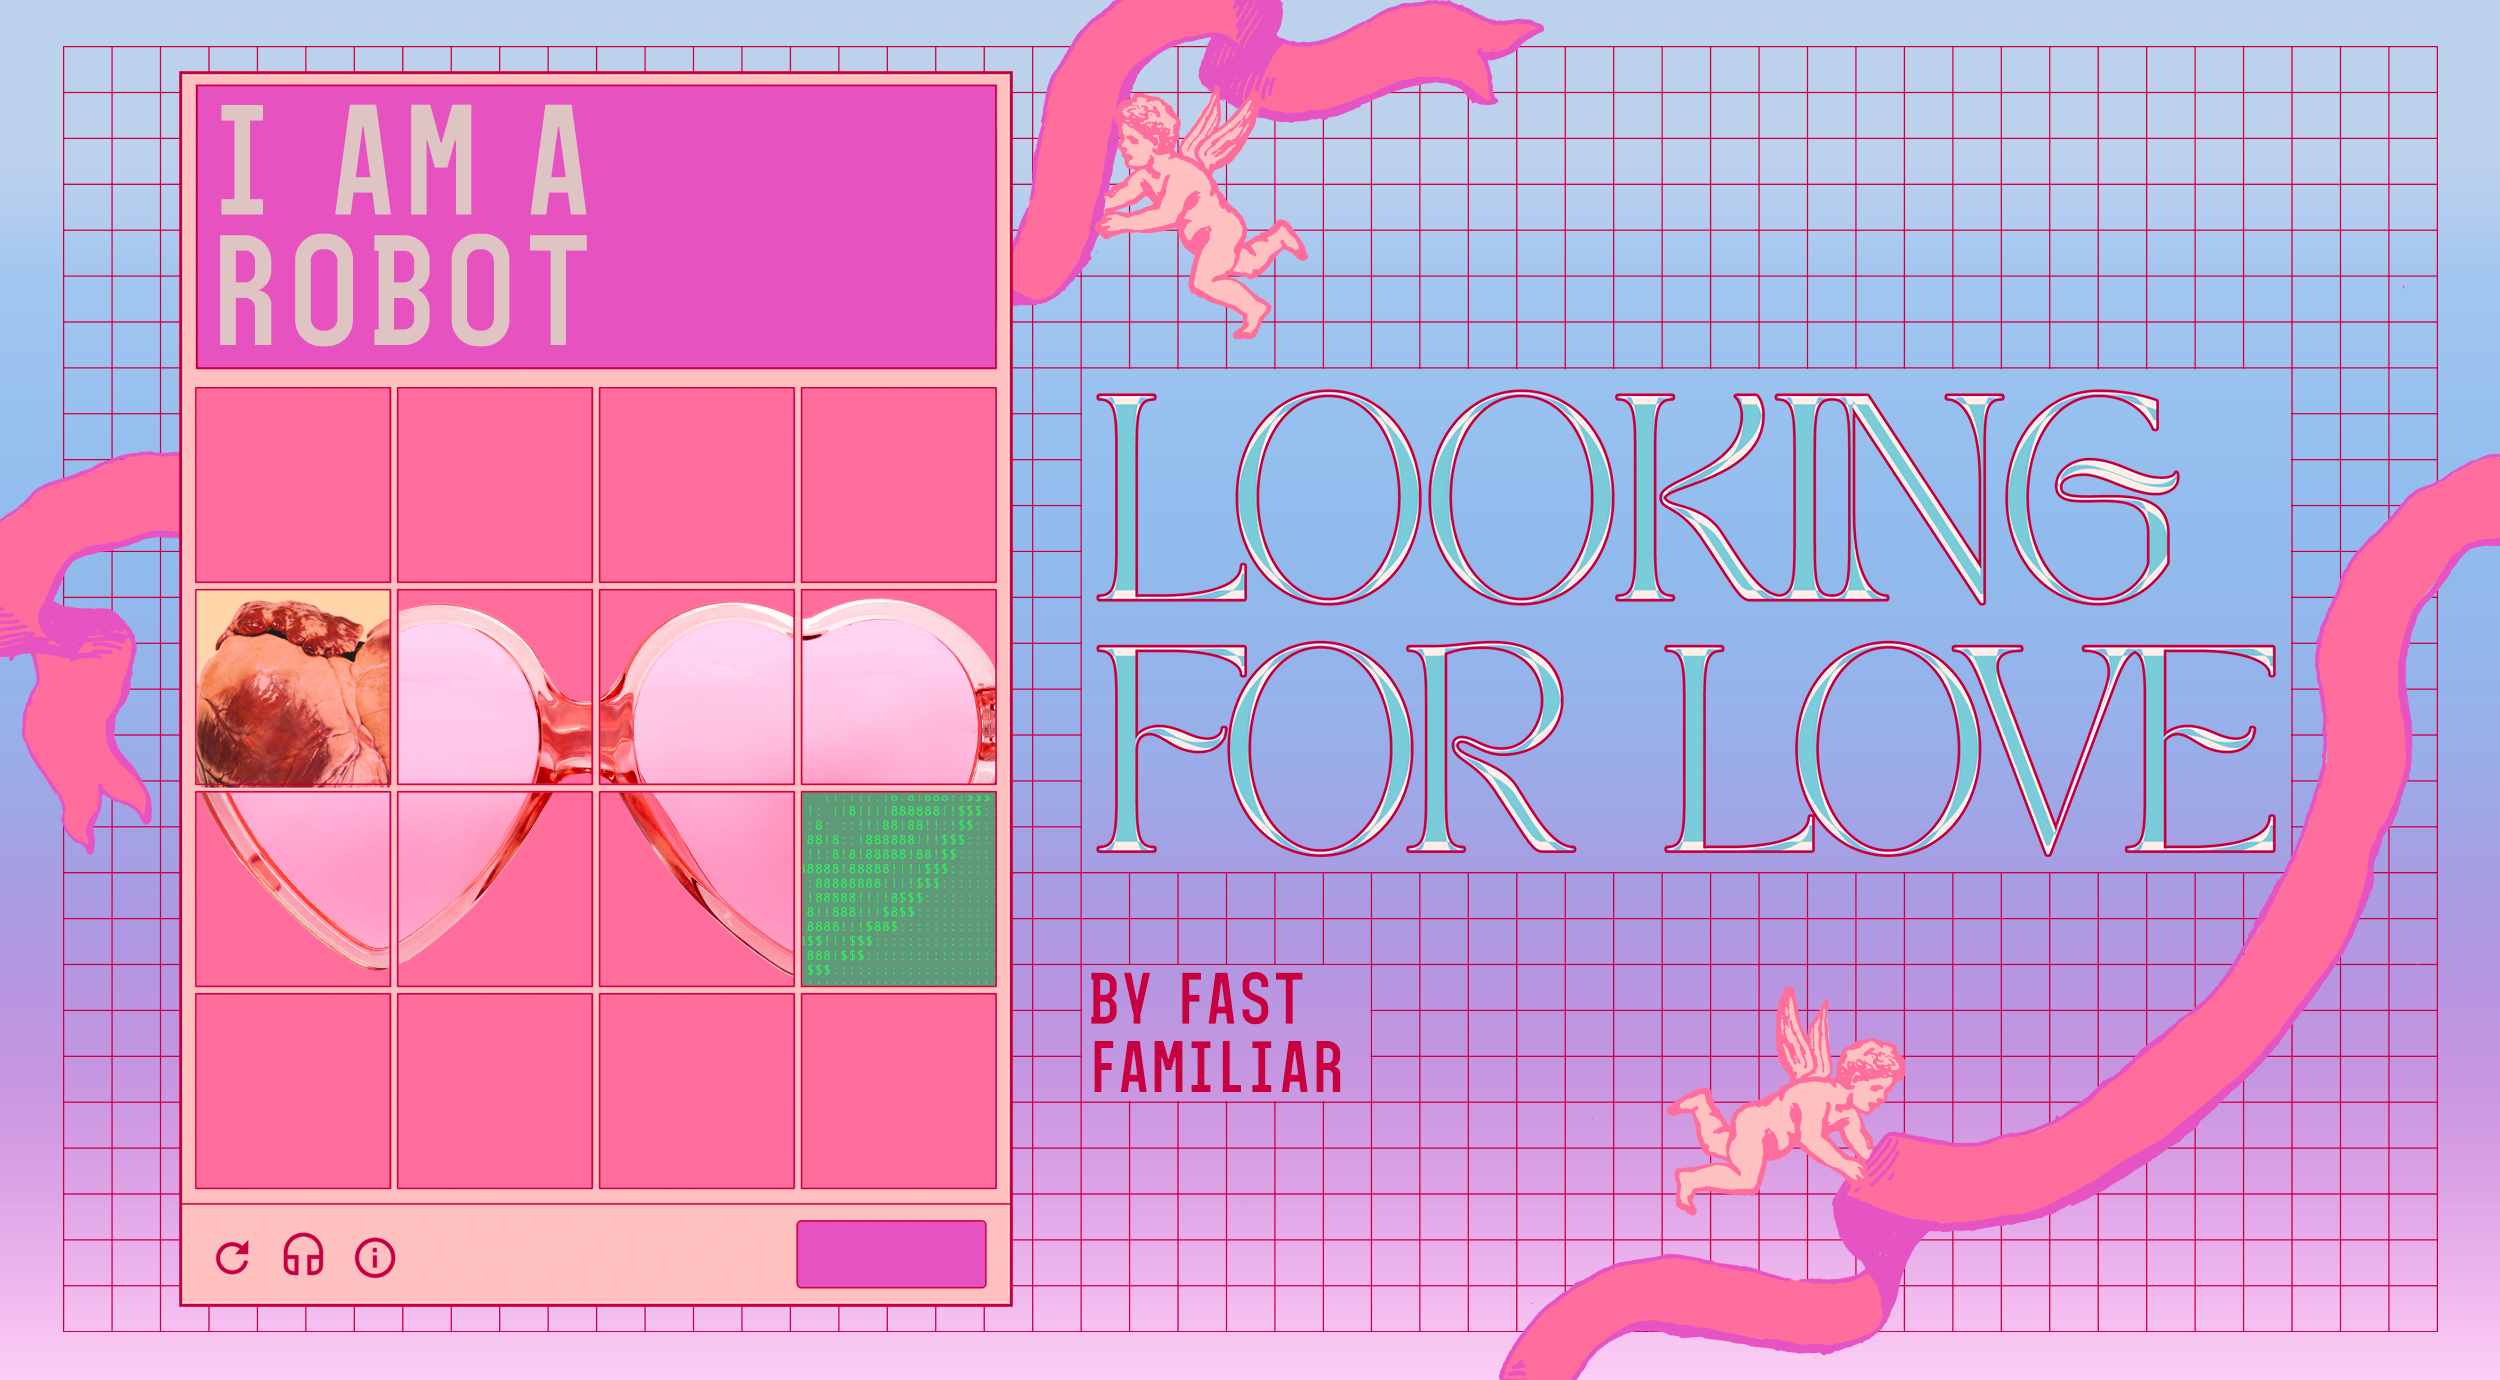 A captcha grid in lurid pink. A heart-shaped pair of sunglasses reveal in one corner a human heart and in the other, some 'code' green writing. There are ribbons and cherubs.